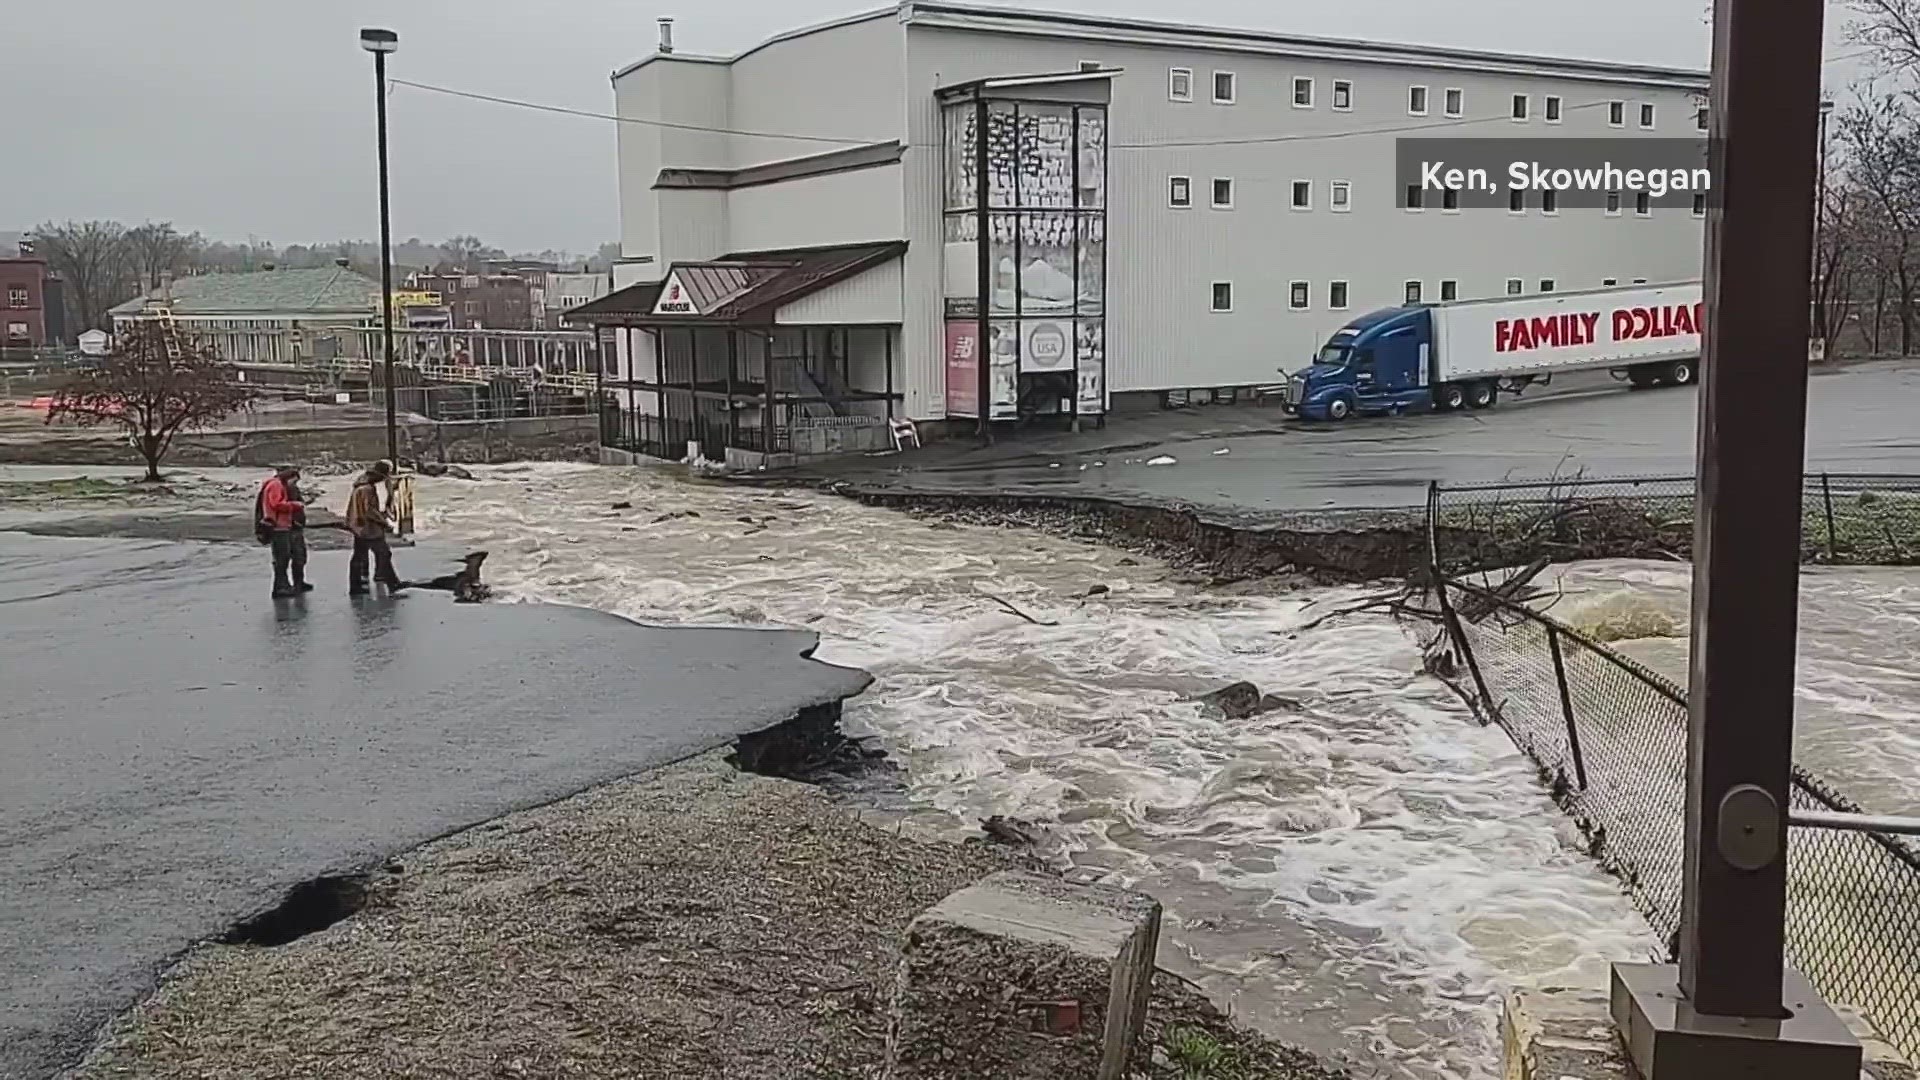 Maine communities recovering after flooding, power outages